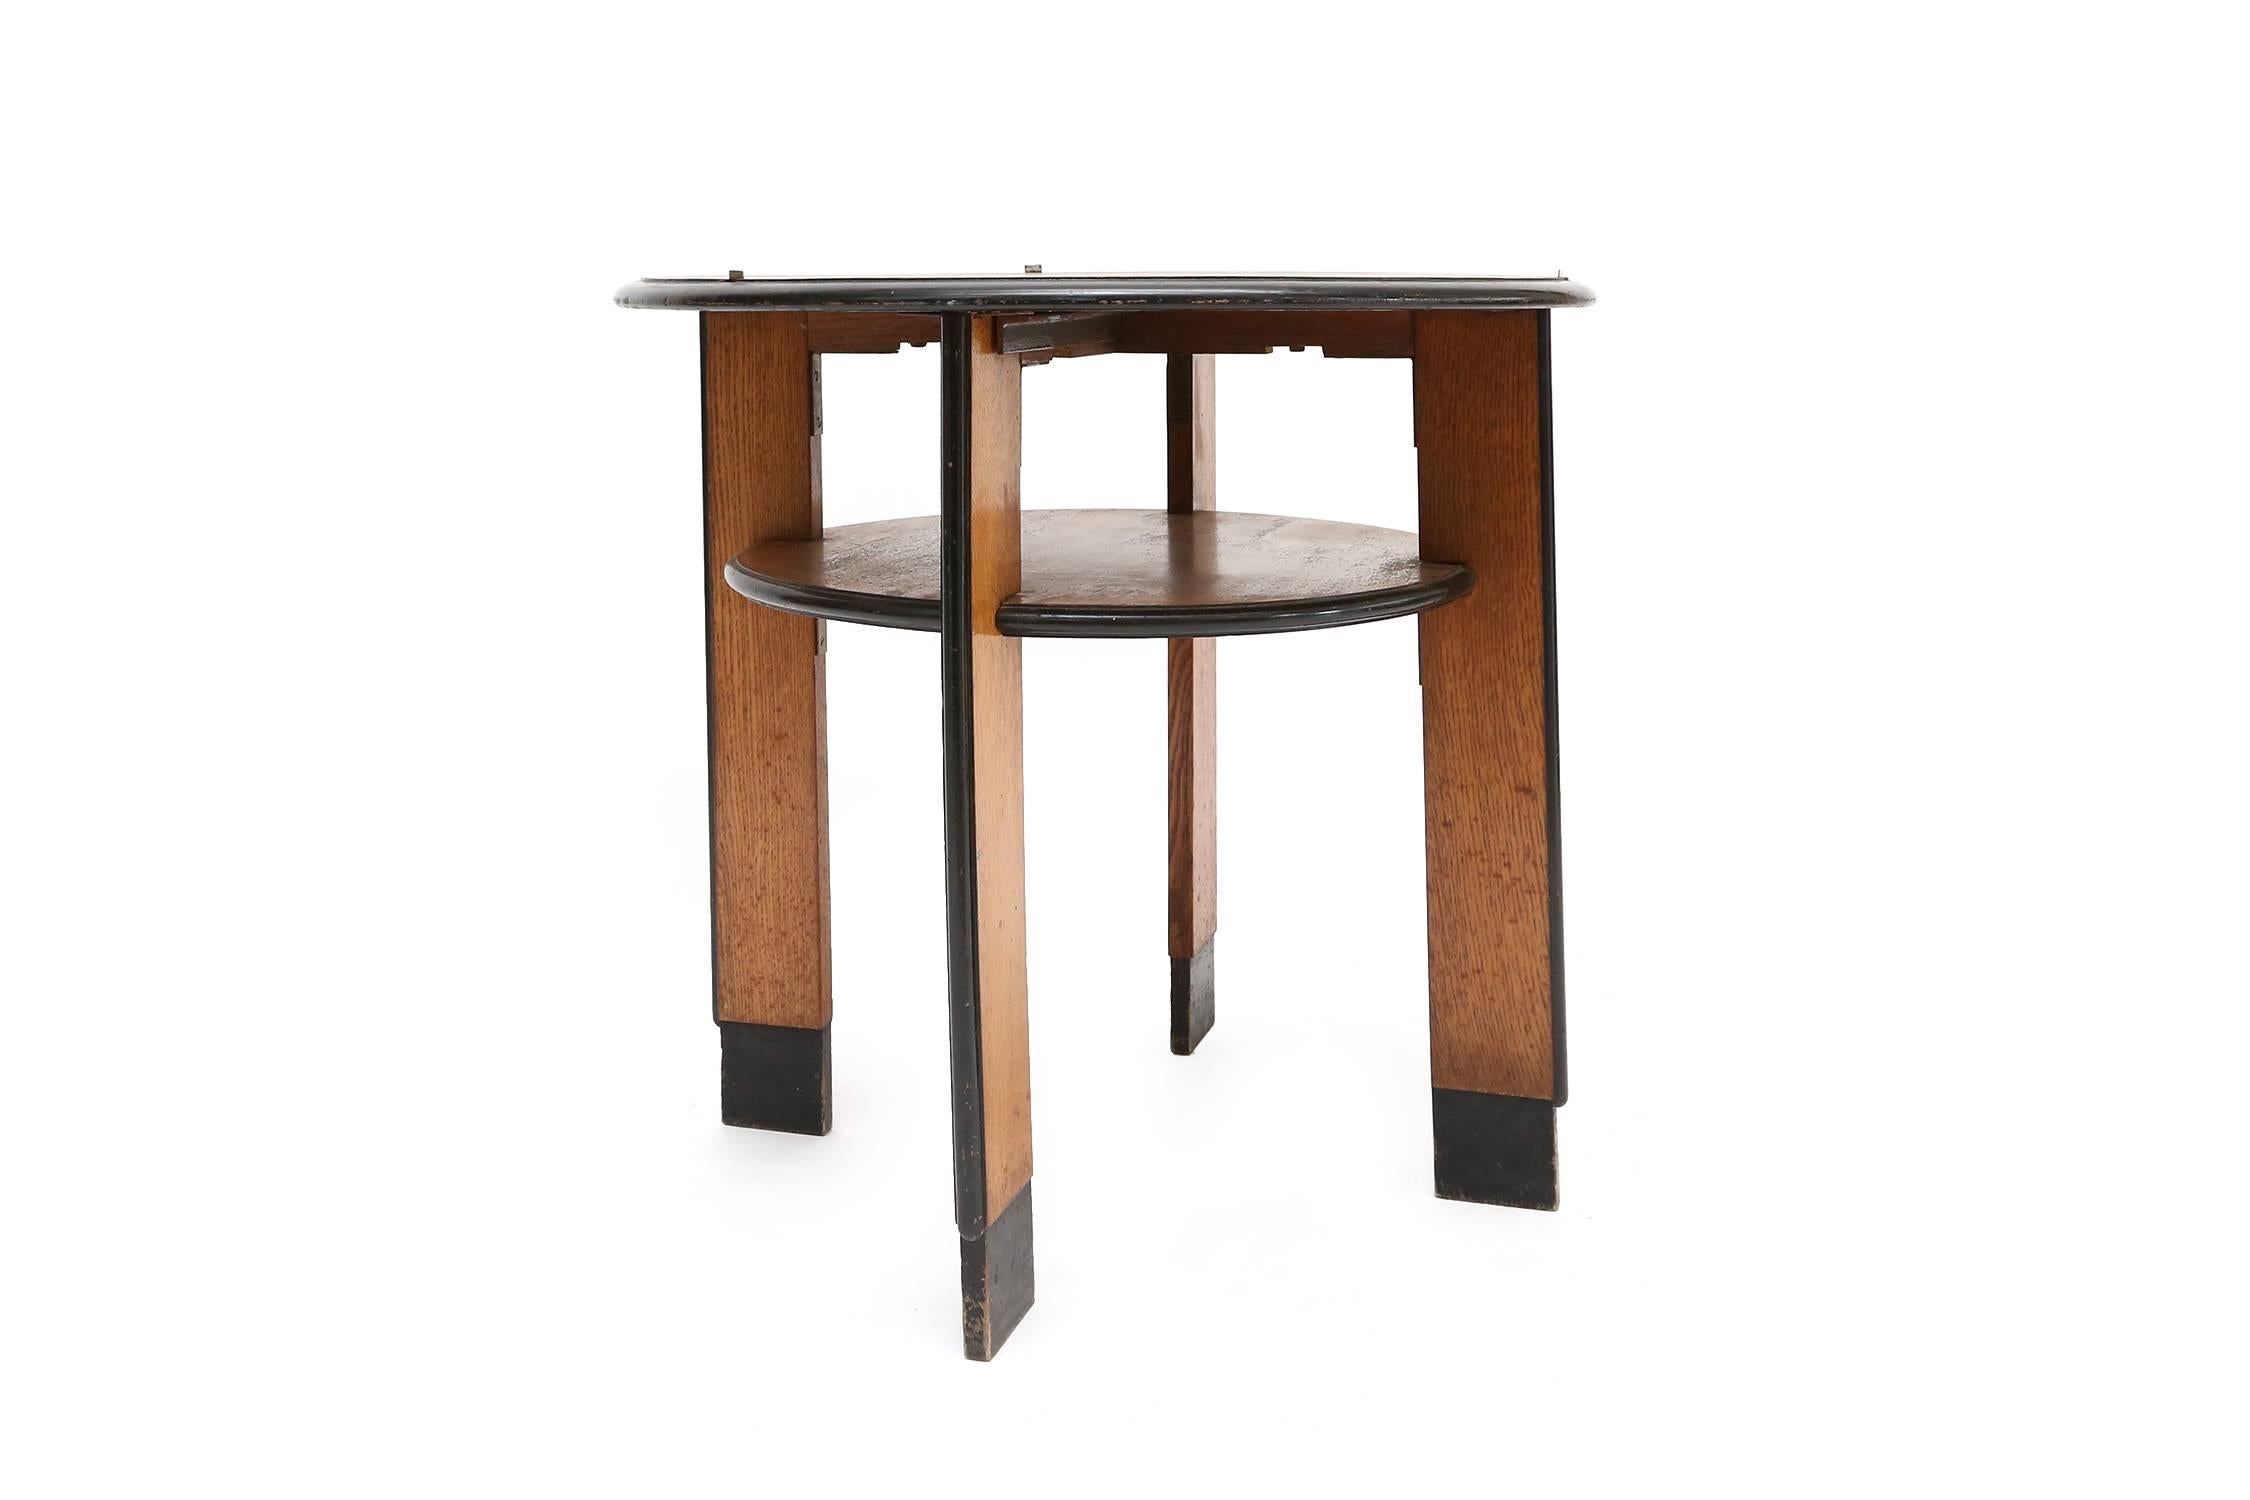 Rare constructivist occasional table
by Huib Hoste, famous Belgian architect who worked with Le Corbusier amongst others.
Designed for a clinic in Bruges in the 1930s.
Measures: H 65 cm, Ø 71 cm.
  